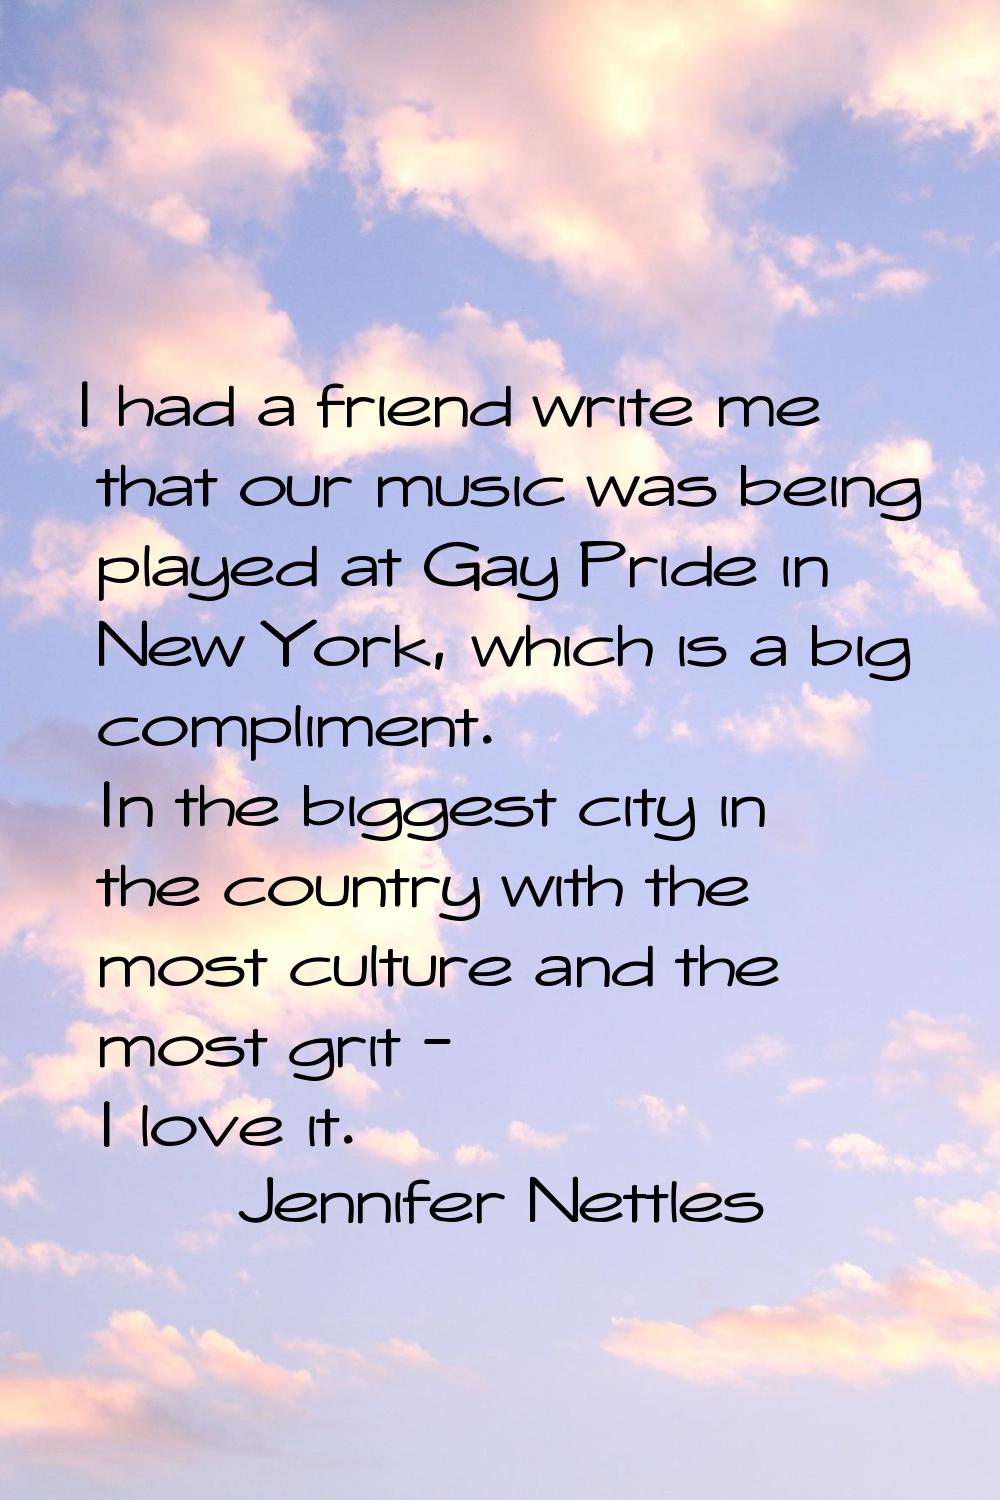 I had a friend write me that our music was being played at Gay Pride in New York, which is a big co